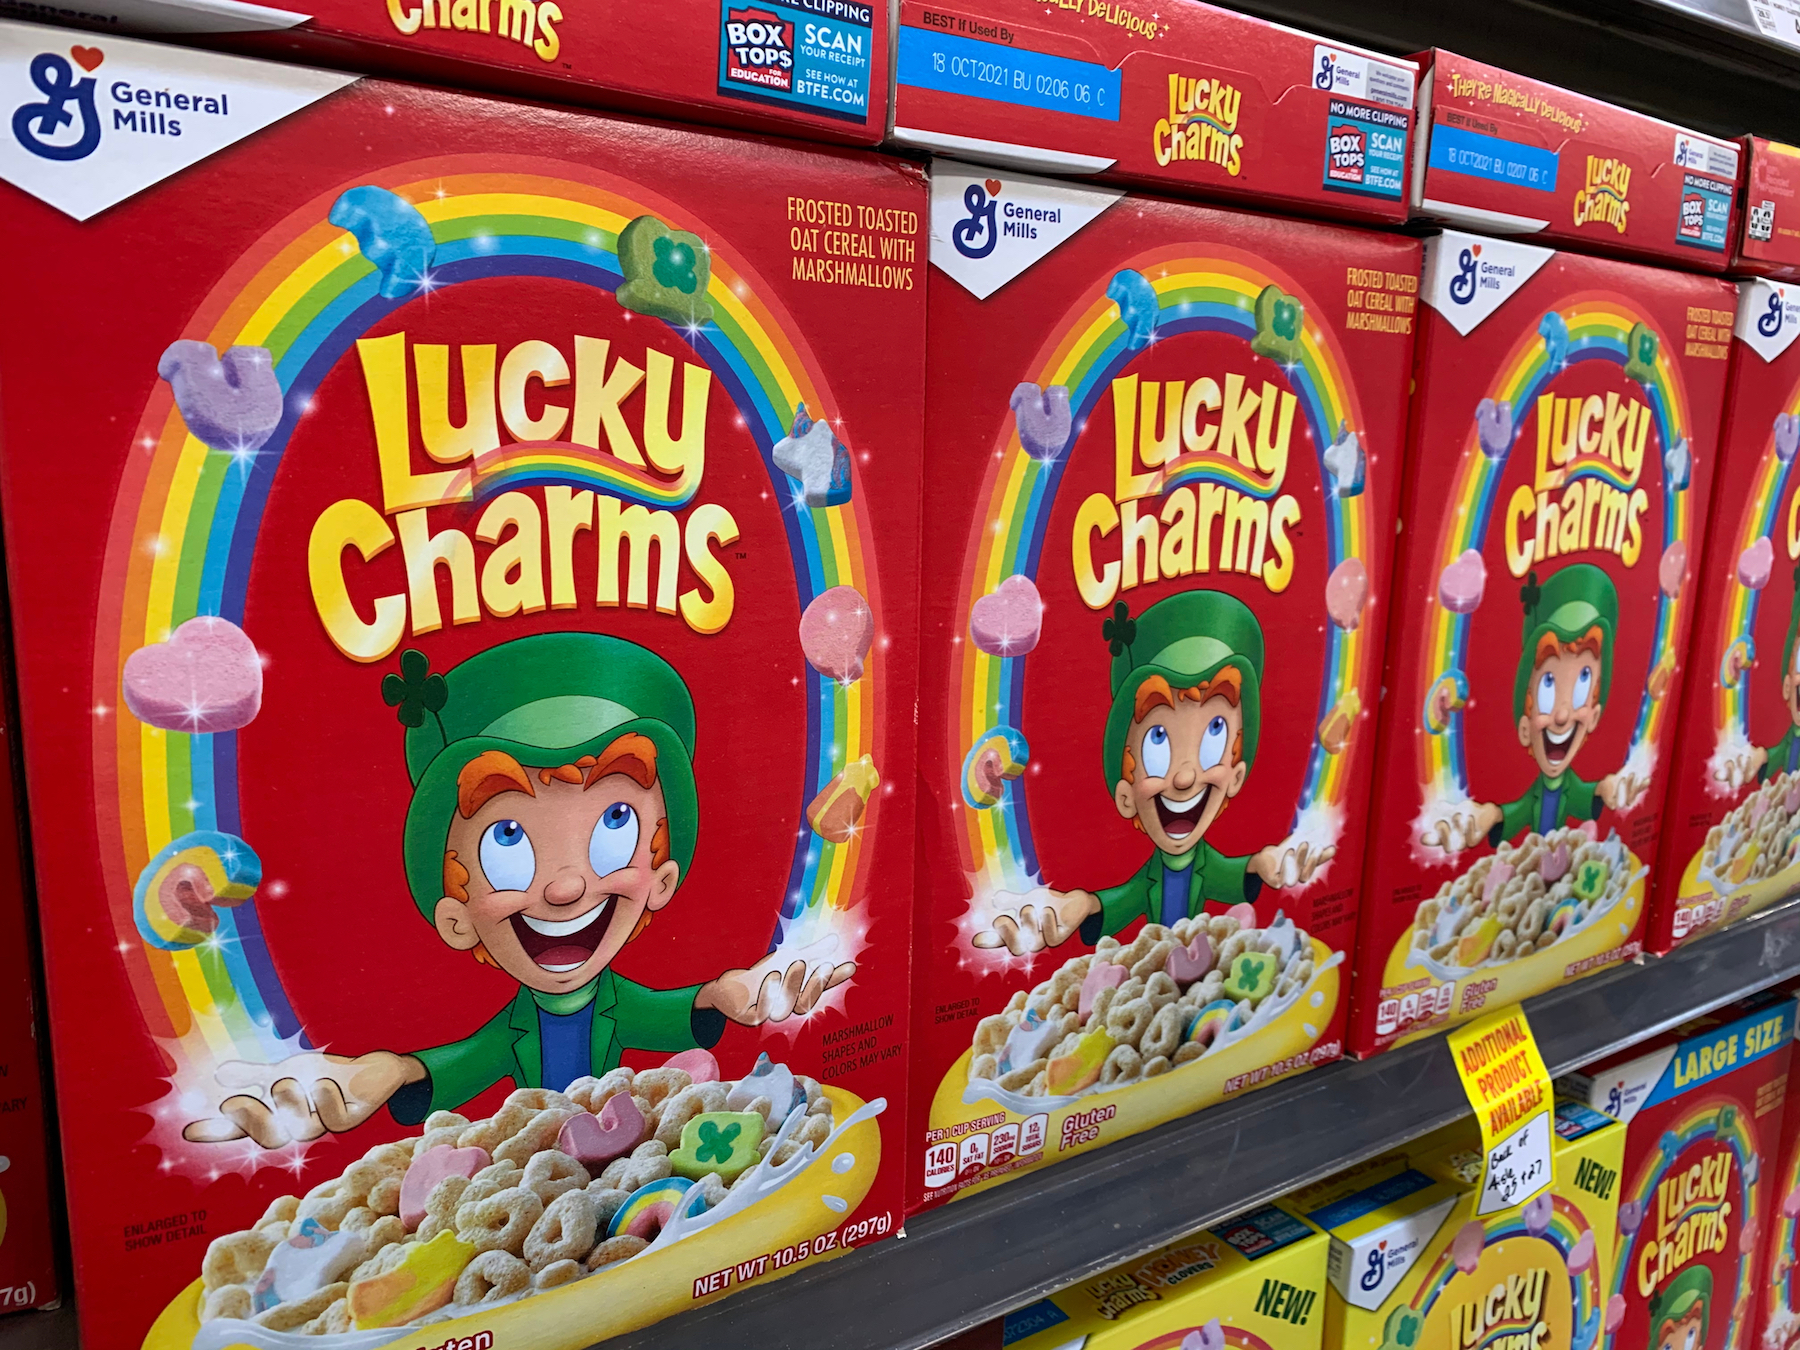 The White House Nutrition Director develops something called “Food Compass” which demonizes real foods while praising processed meals like Lucky Charms